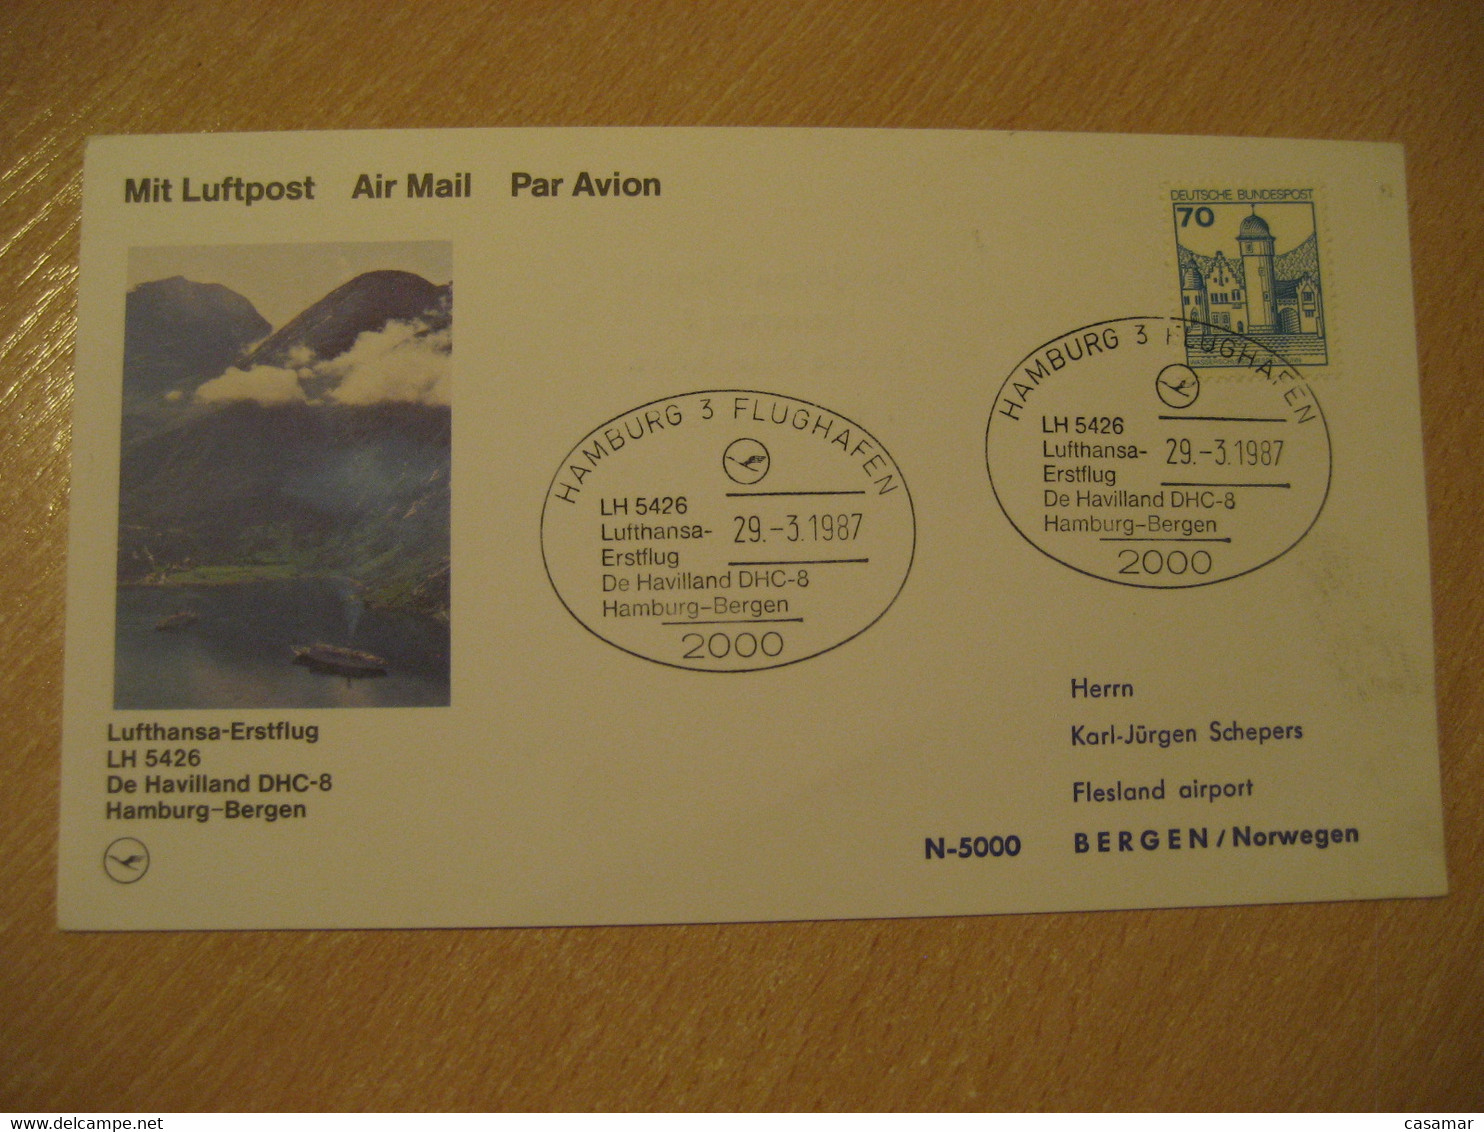 BERGEN Hamburg 1987 Lufthansa Airlines Airline De Havilland DHC-8 First Flight Cancel Card NORWAY GERMANY - Covers & Documents